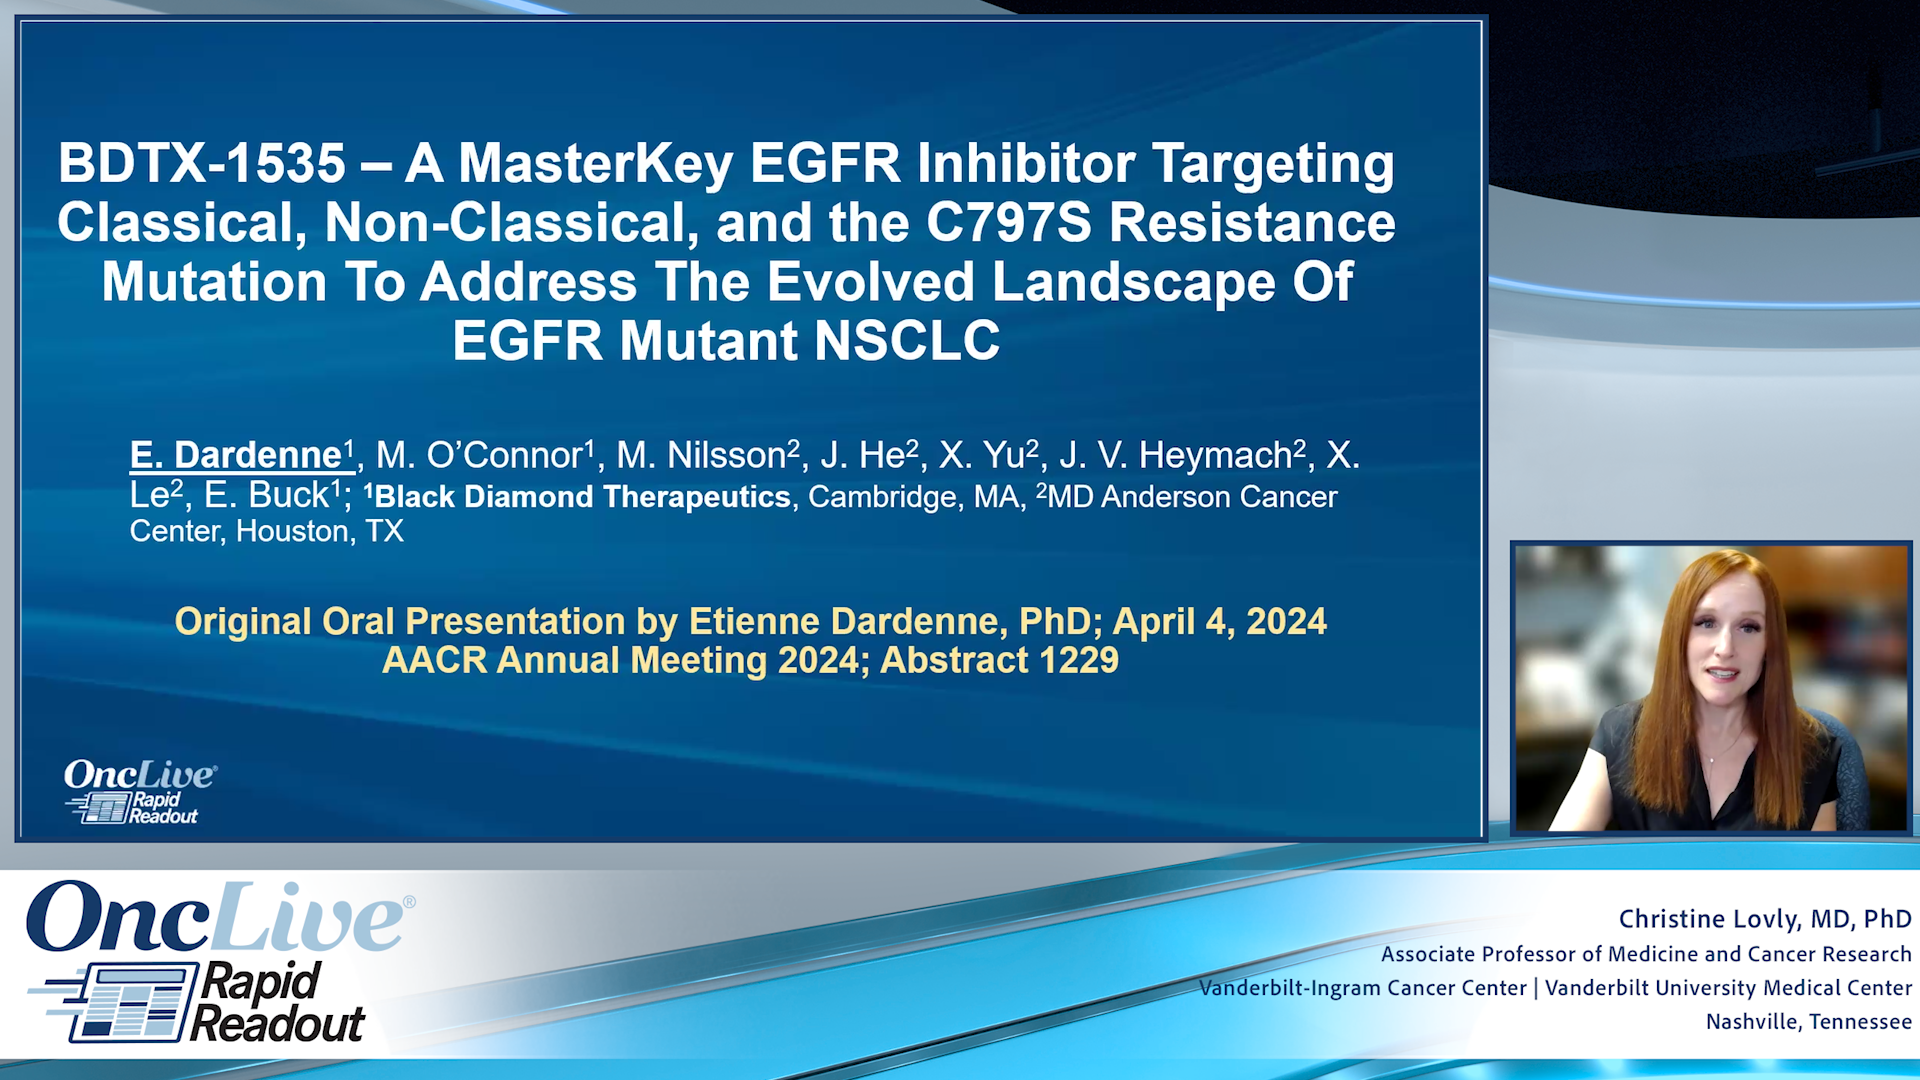 BDTX-1535 – A MasterKey EGFR Inhibitor Targeting Classical, Non-Classical, and the C797S Resistance Mutation To Address The Evolved Landscape Of EGFR Mutant NSCLC